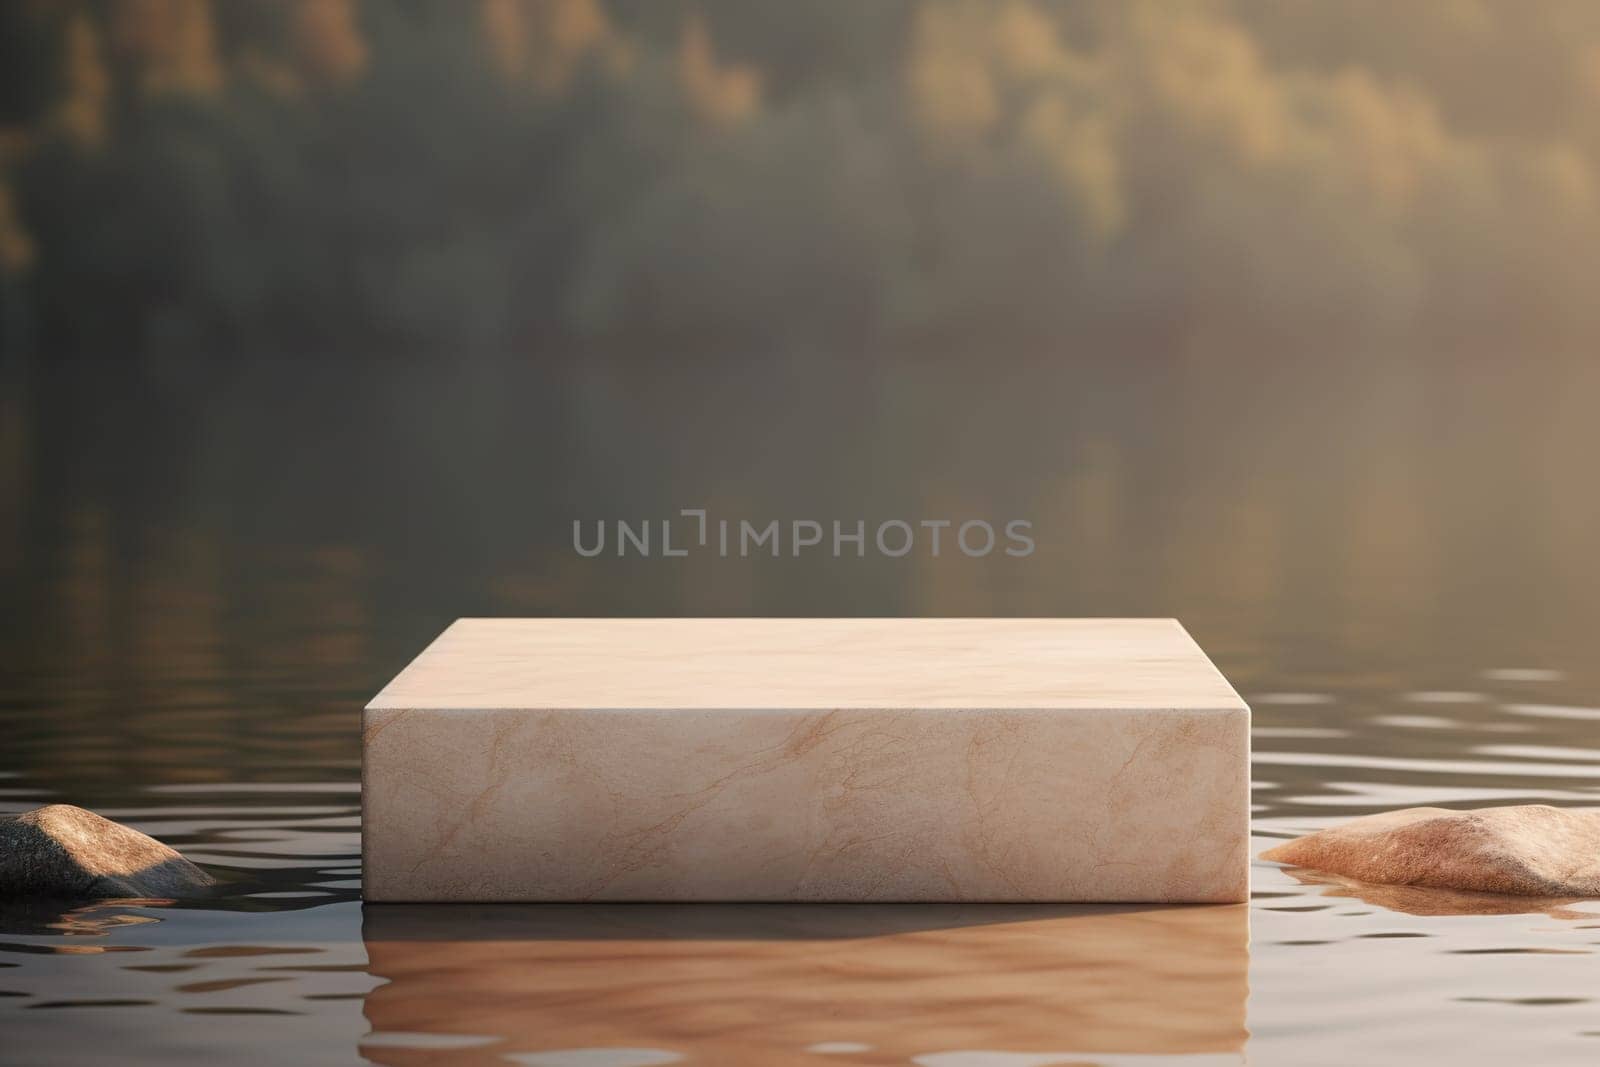 Beige stone podium standing in water. Mock up for product, cosmetic presentation. Pedestal or platform for beauty products. Empty scene. Stage, display showcase. Podium with copy space. Generative AI